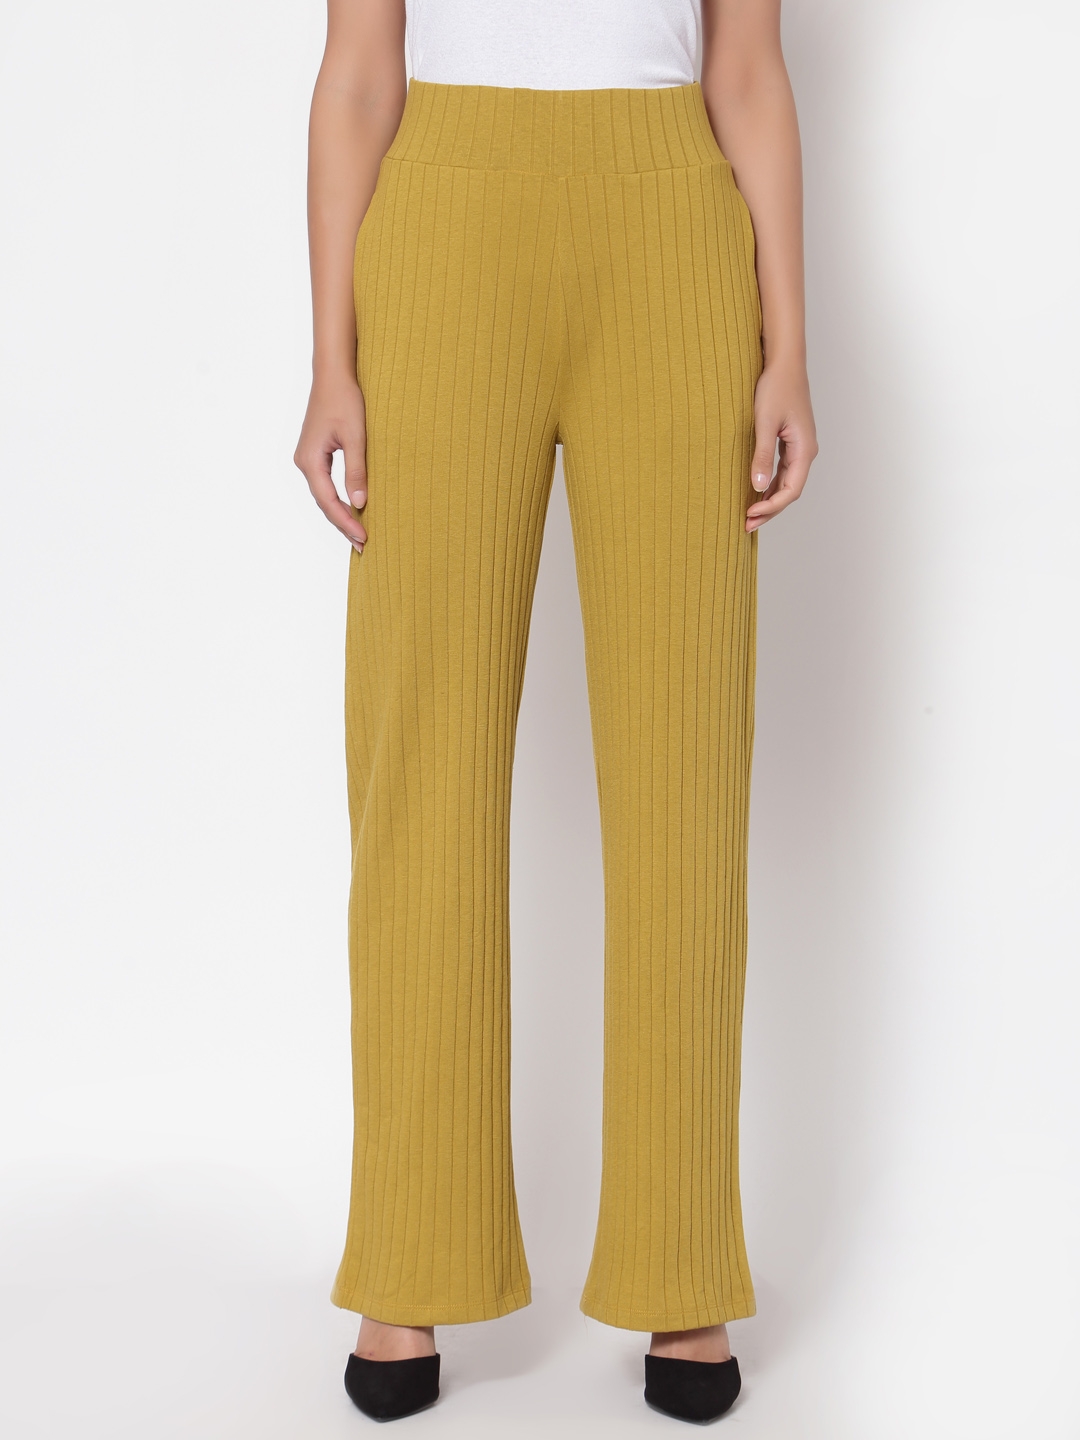 YOONOY | Yoonoy Women Colorblock Straight Pants with Side Pockets